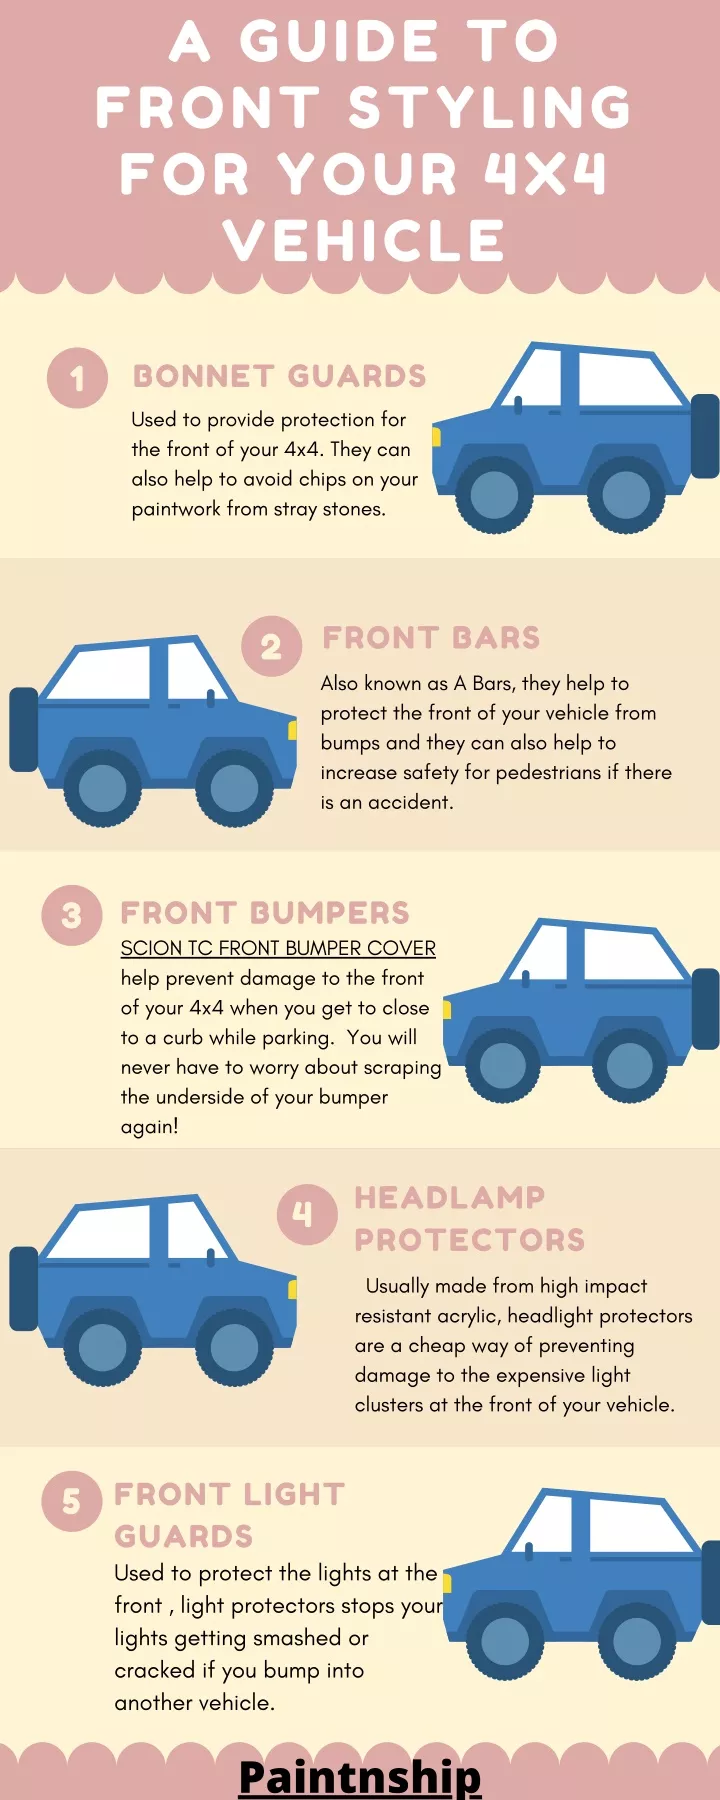 a guide to front styling for your 4x4 vehicle